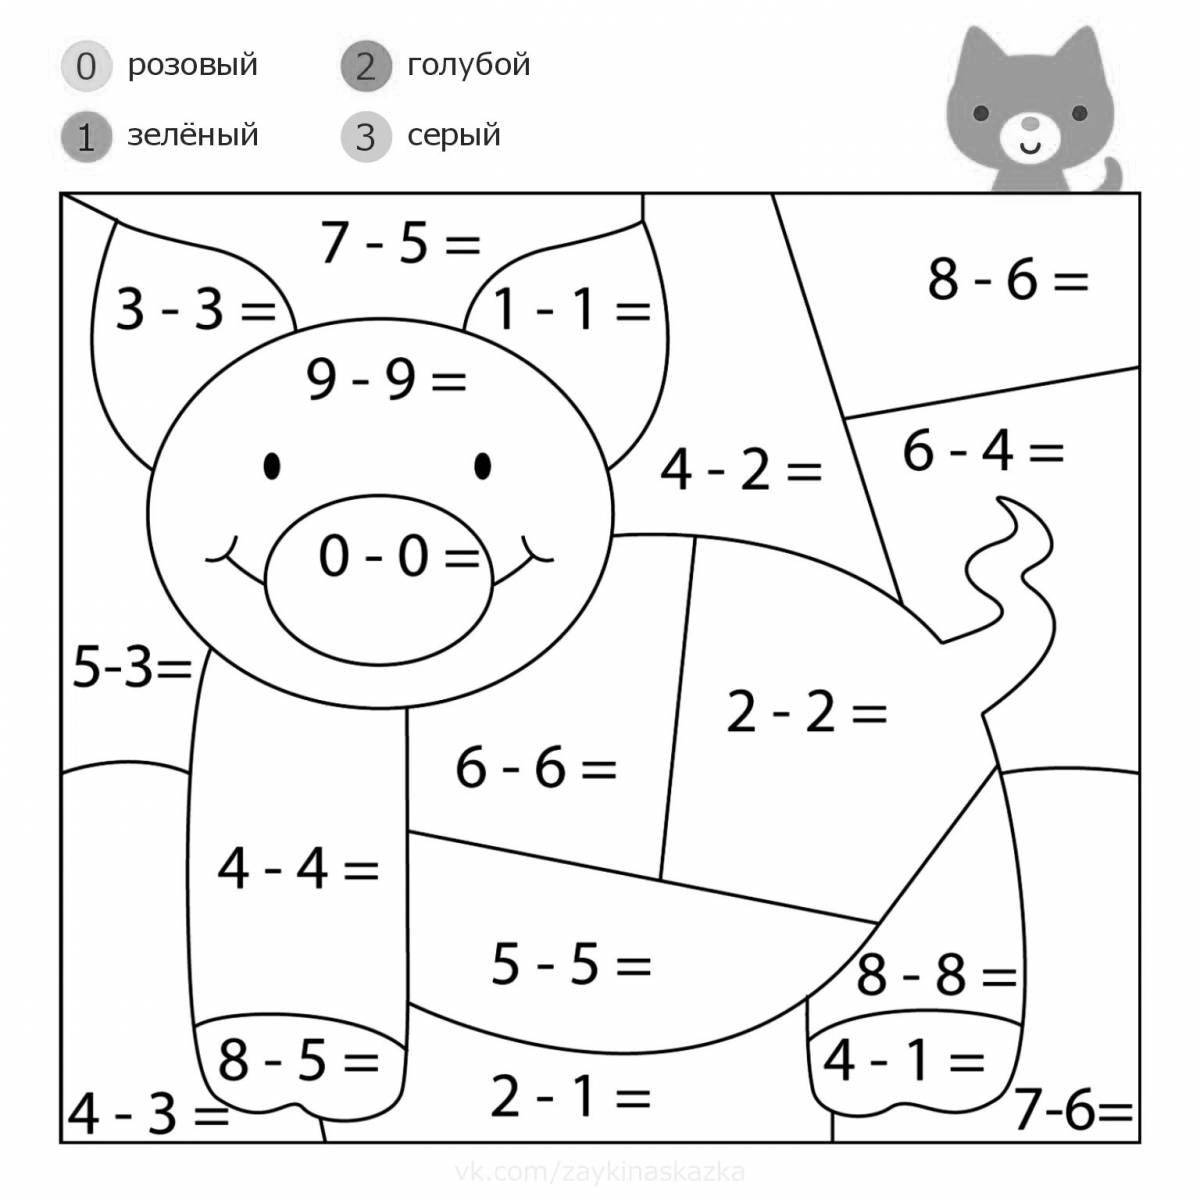 Entertaining mathematics in numbers for children 5-7 years old